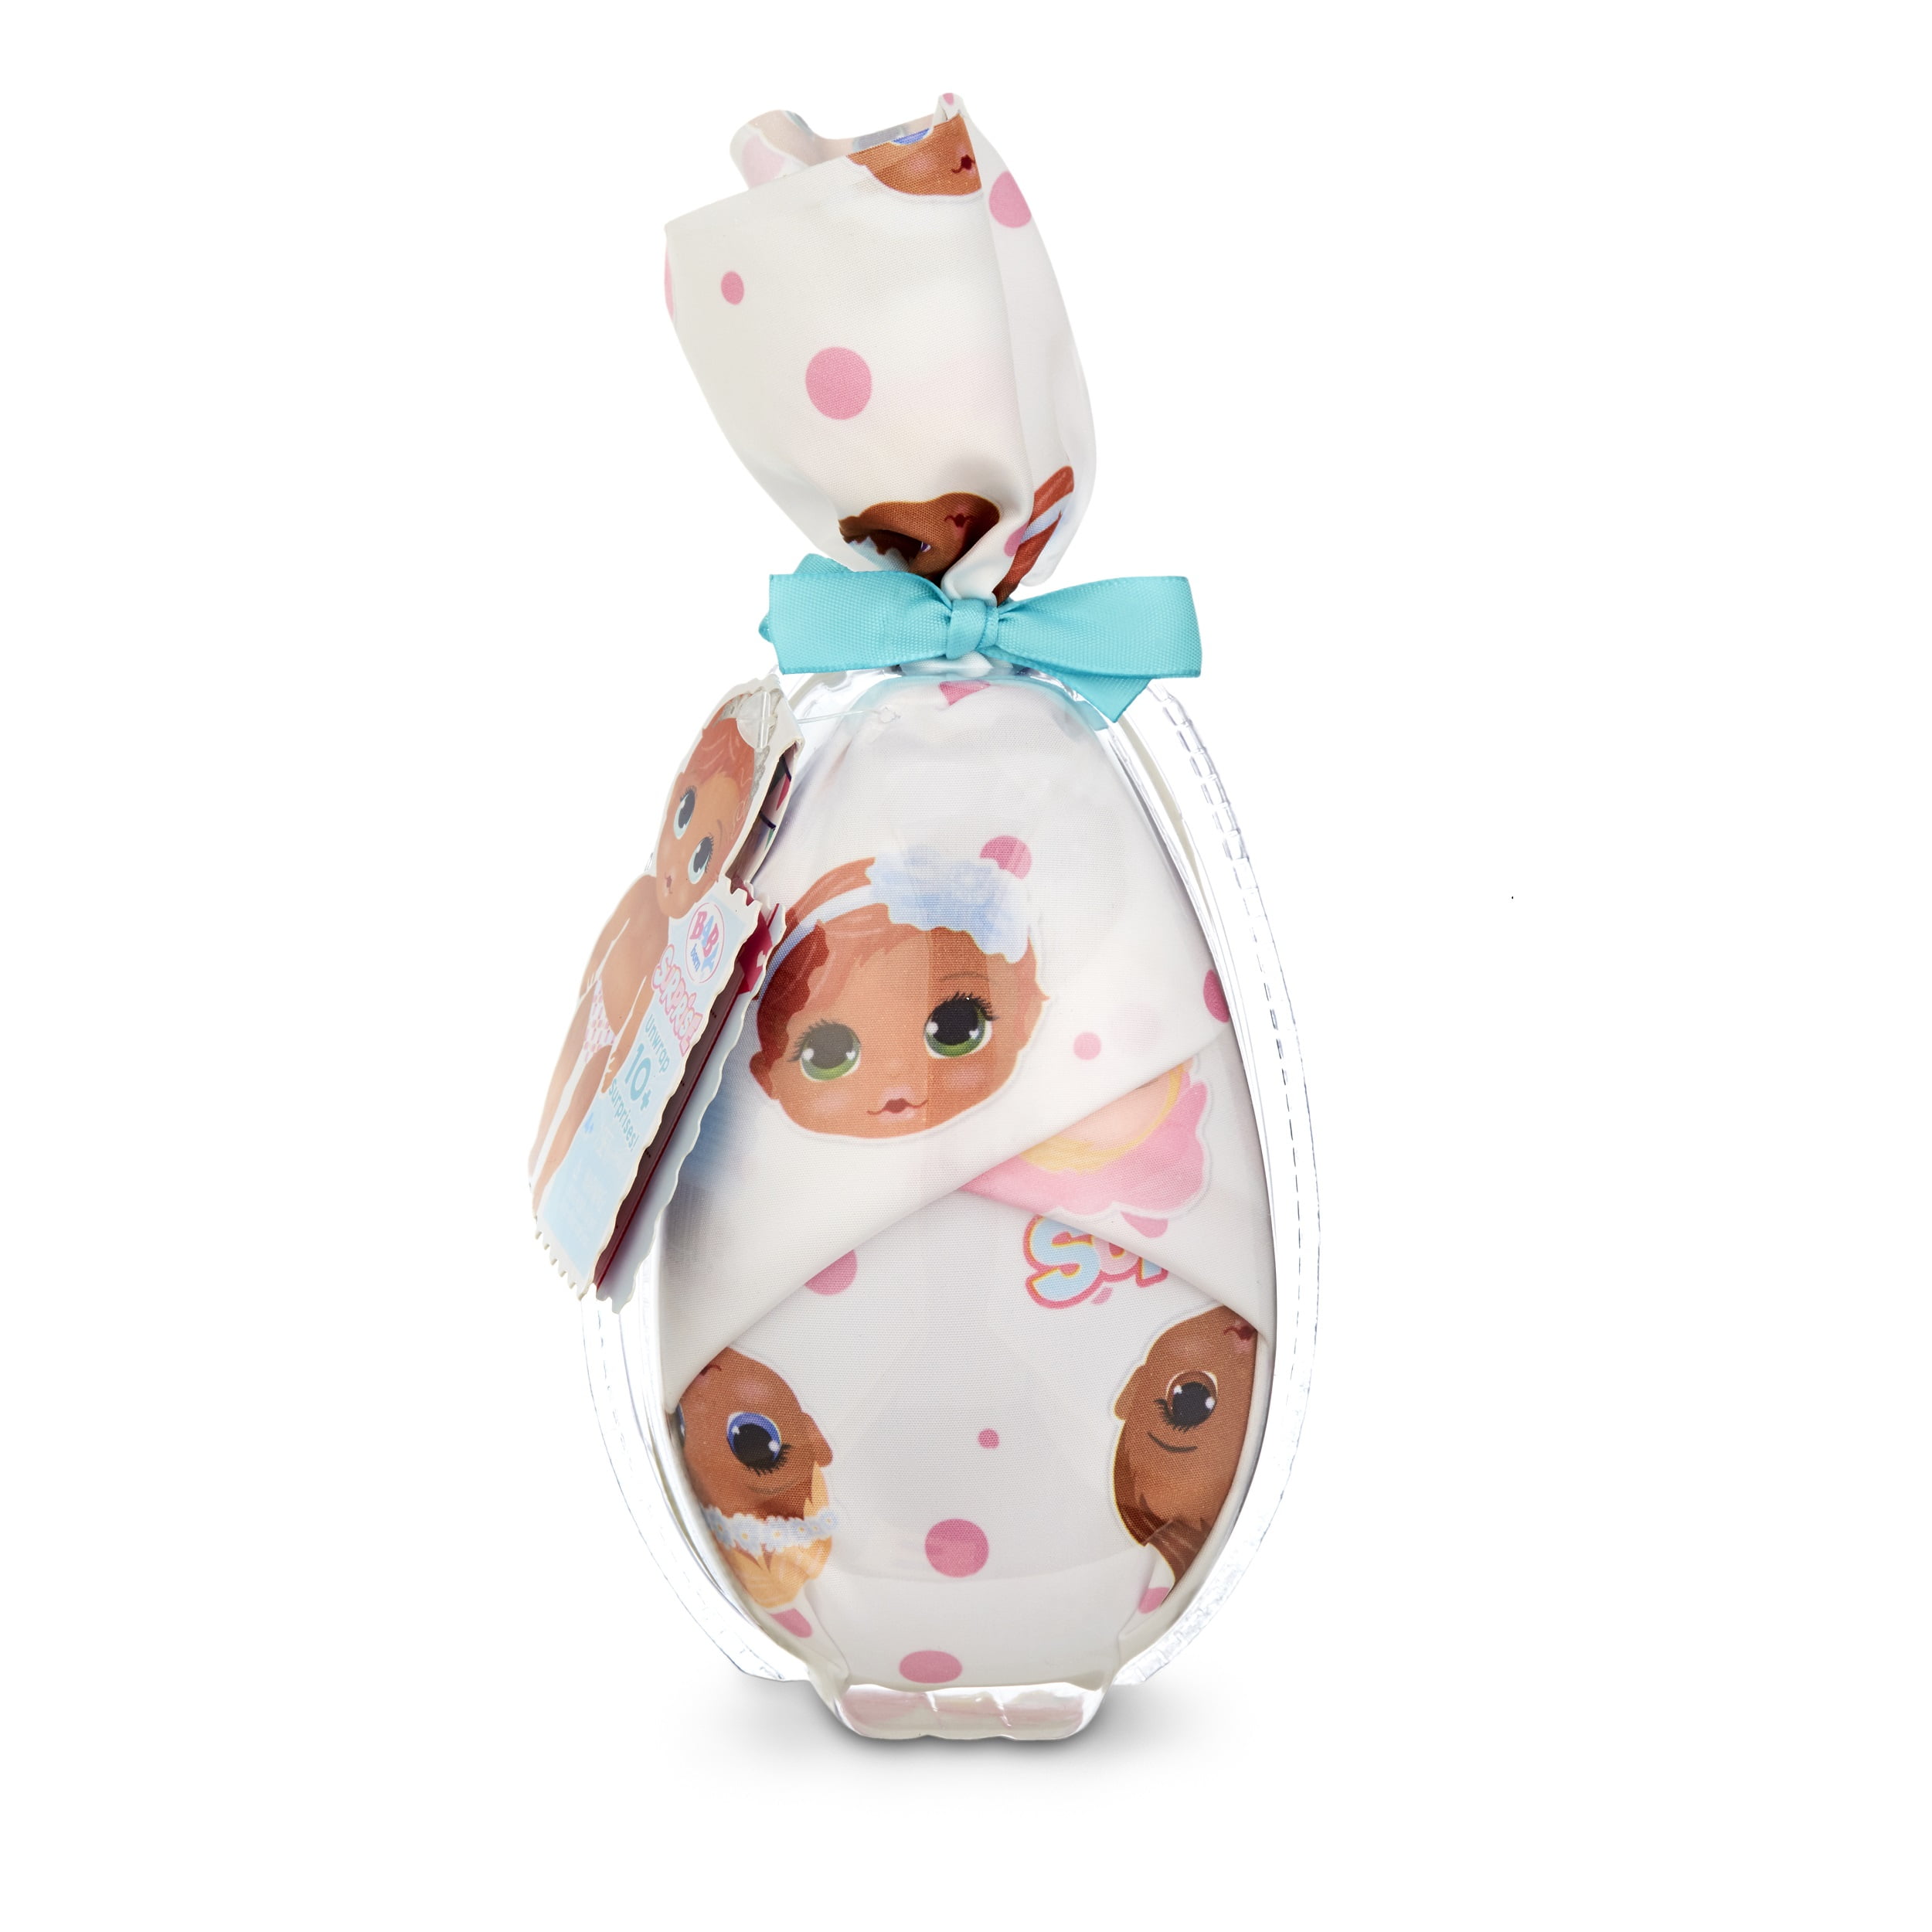  Baby Born Surprise Collectible Baby Dolls with Color Change  Diaper, Multicolor : Toys & Games